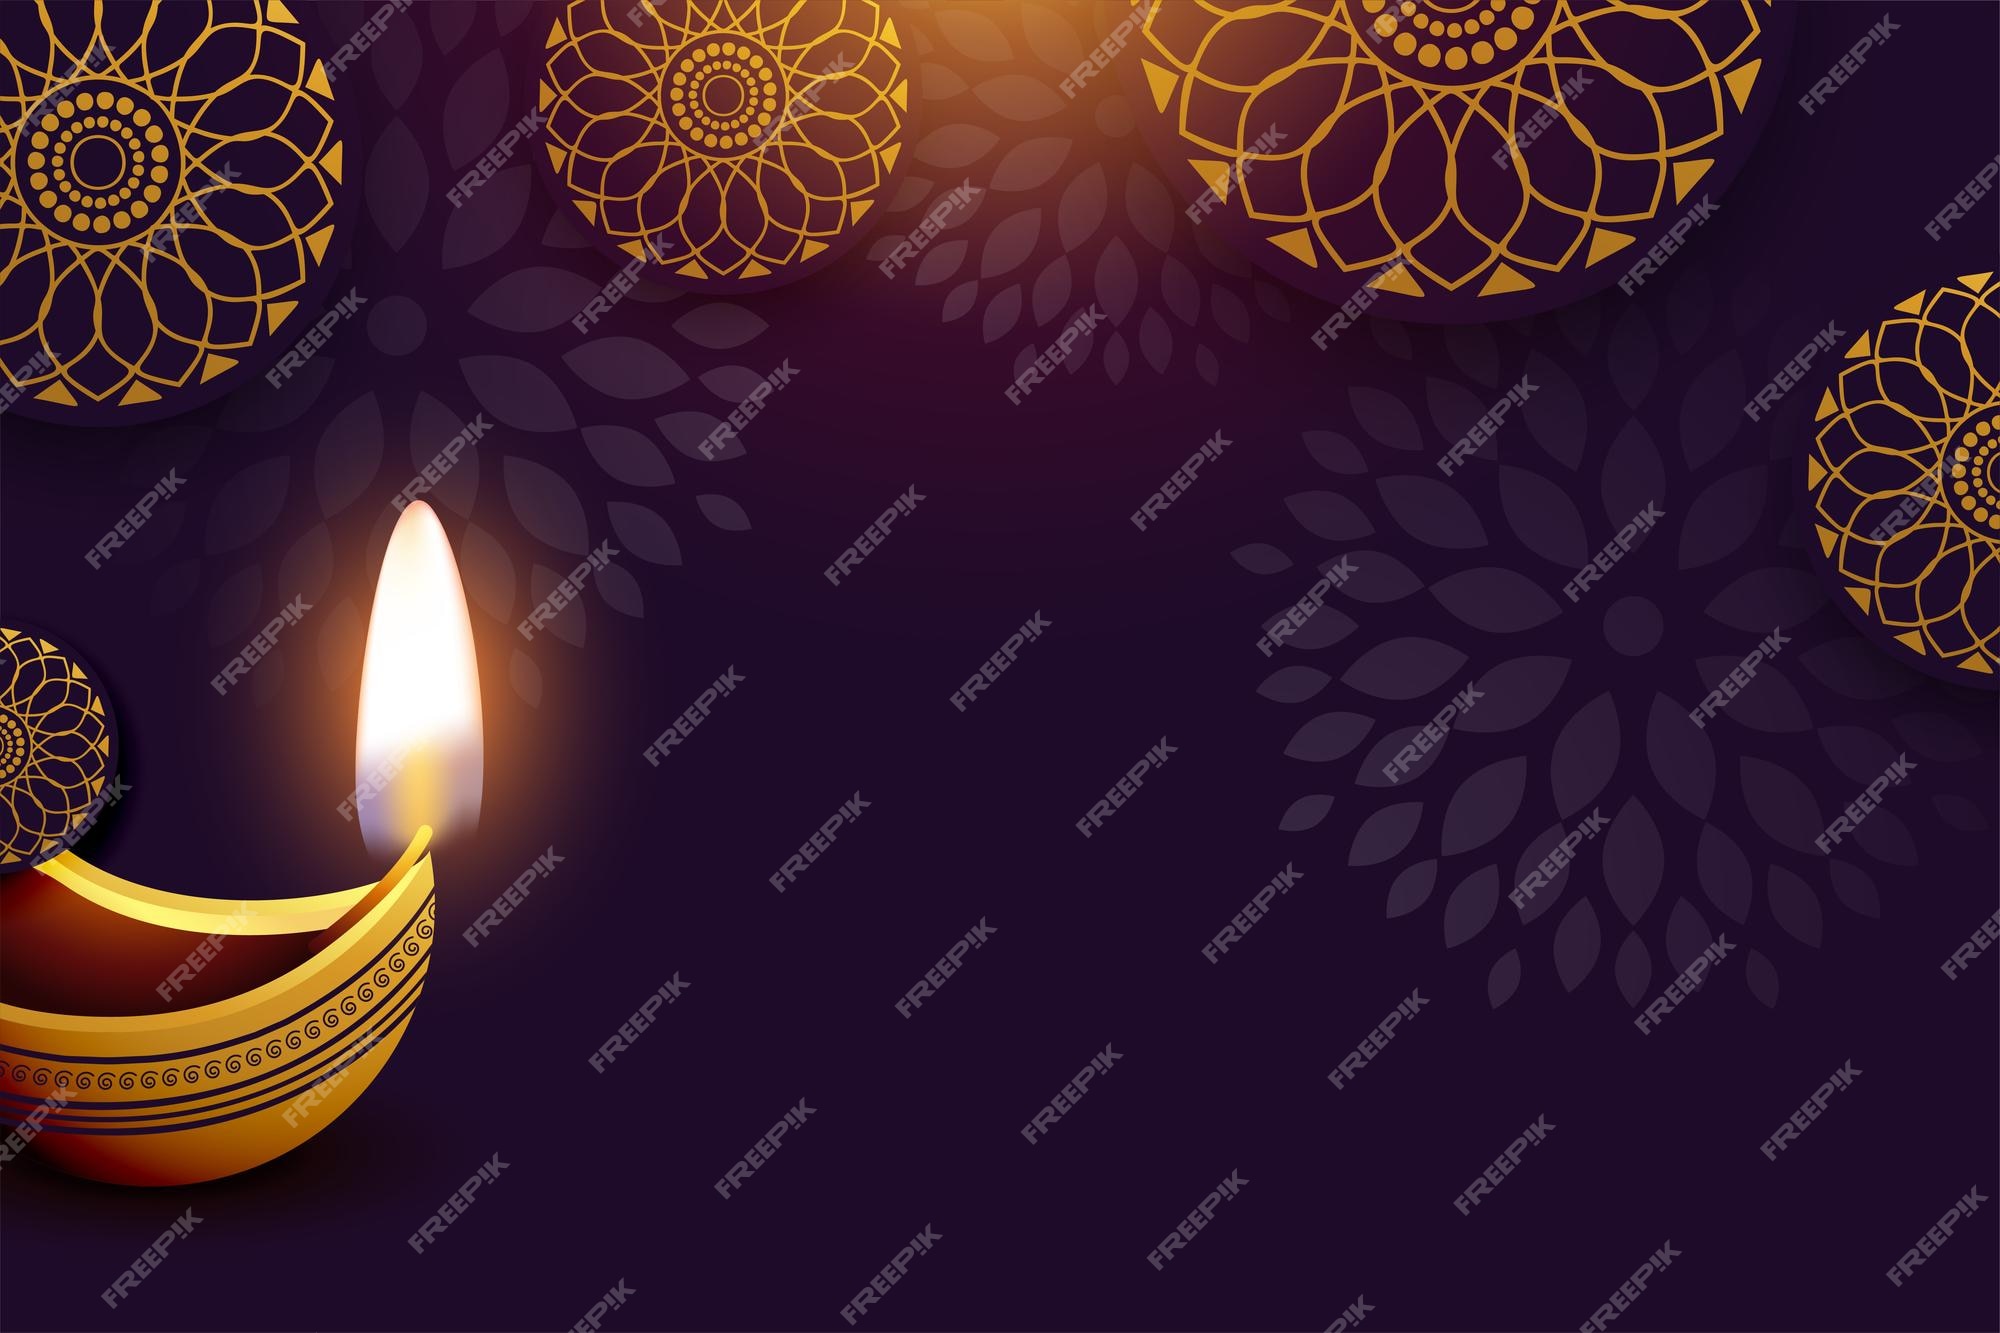 Free Vector | Shubh diwali background with oil diya or lamp design